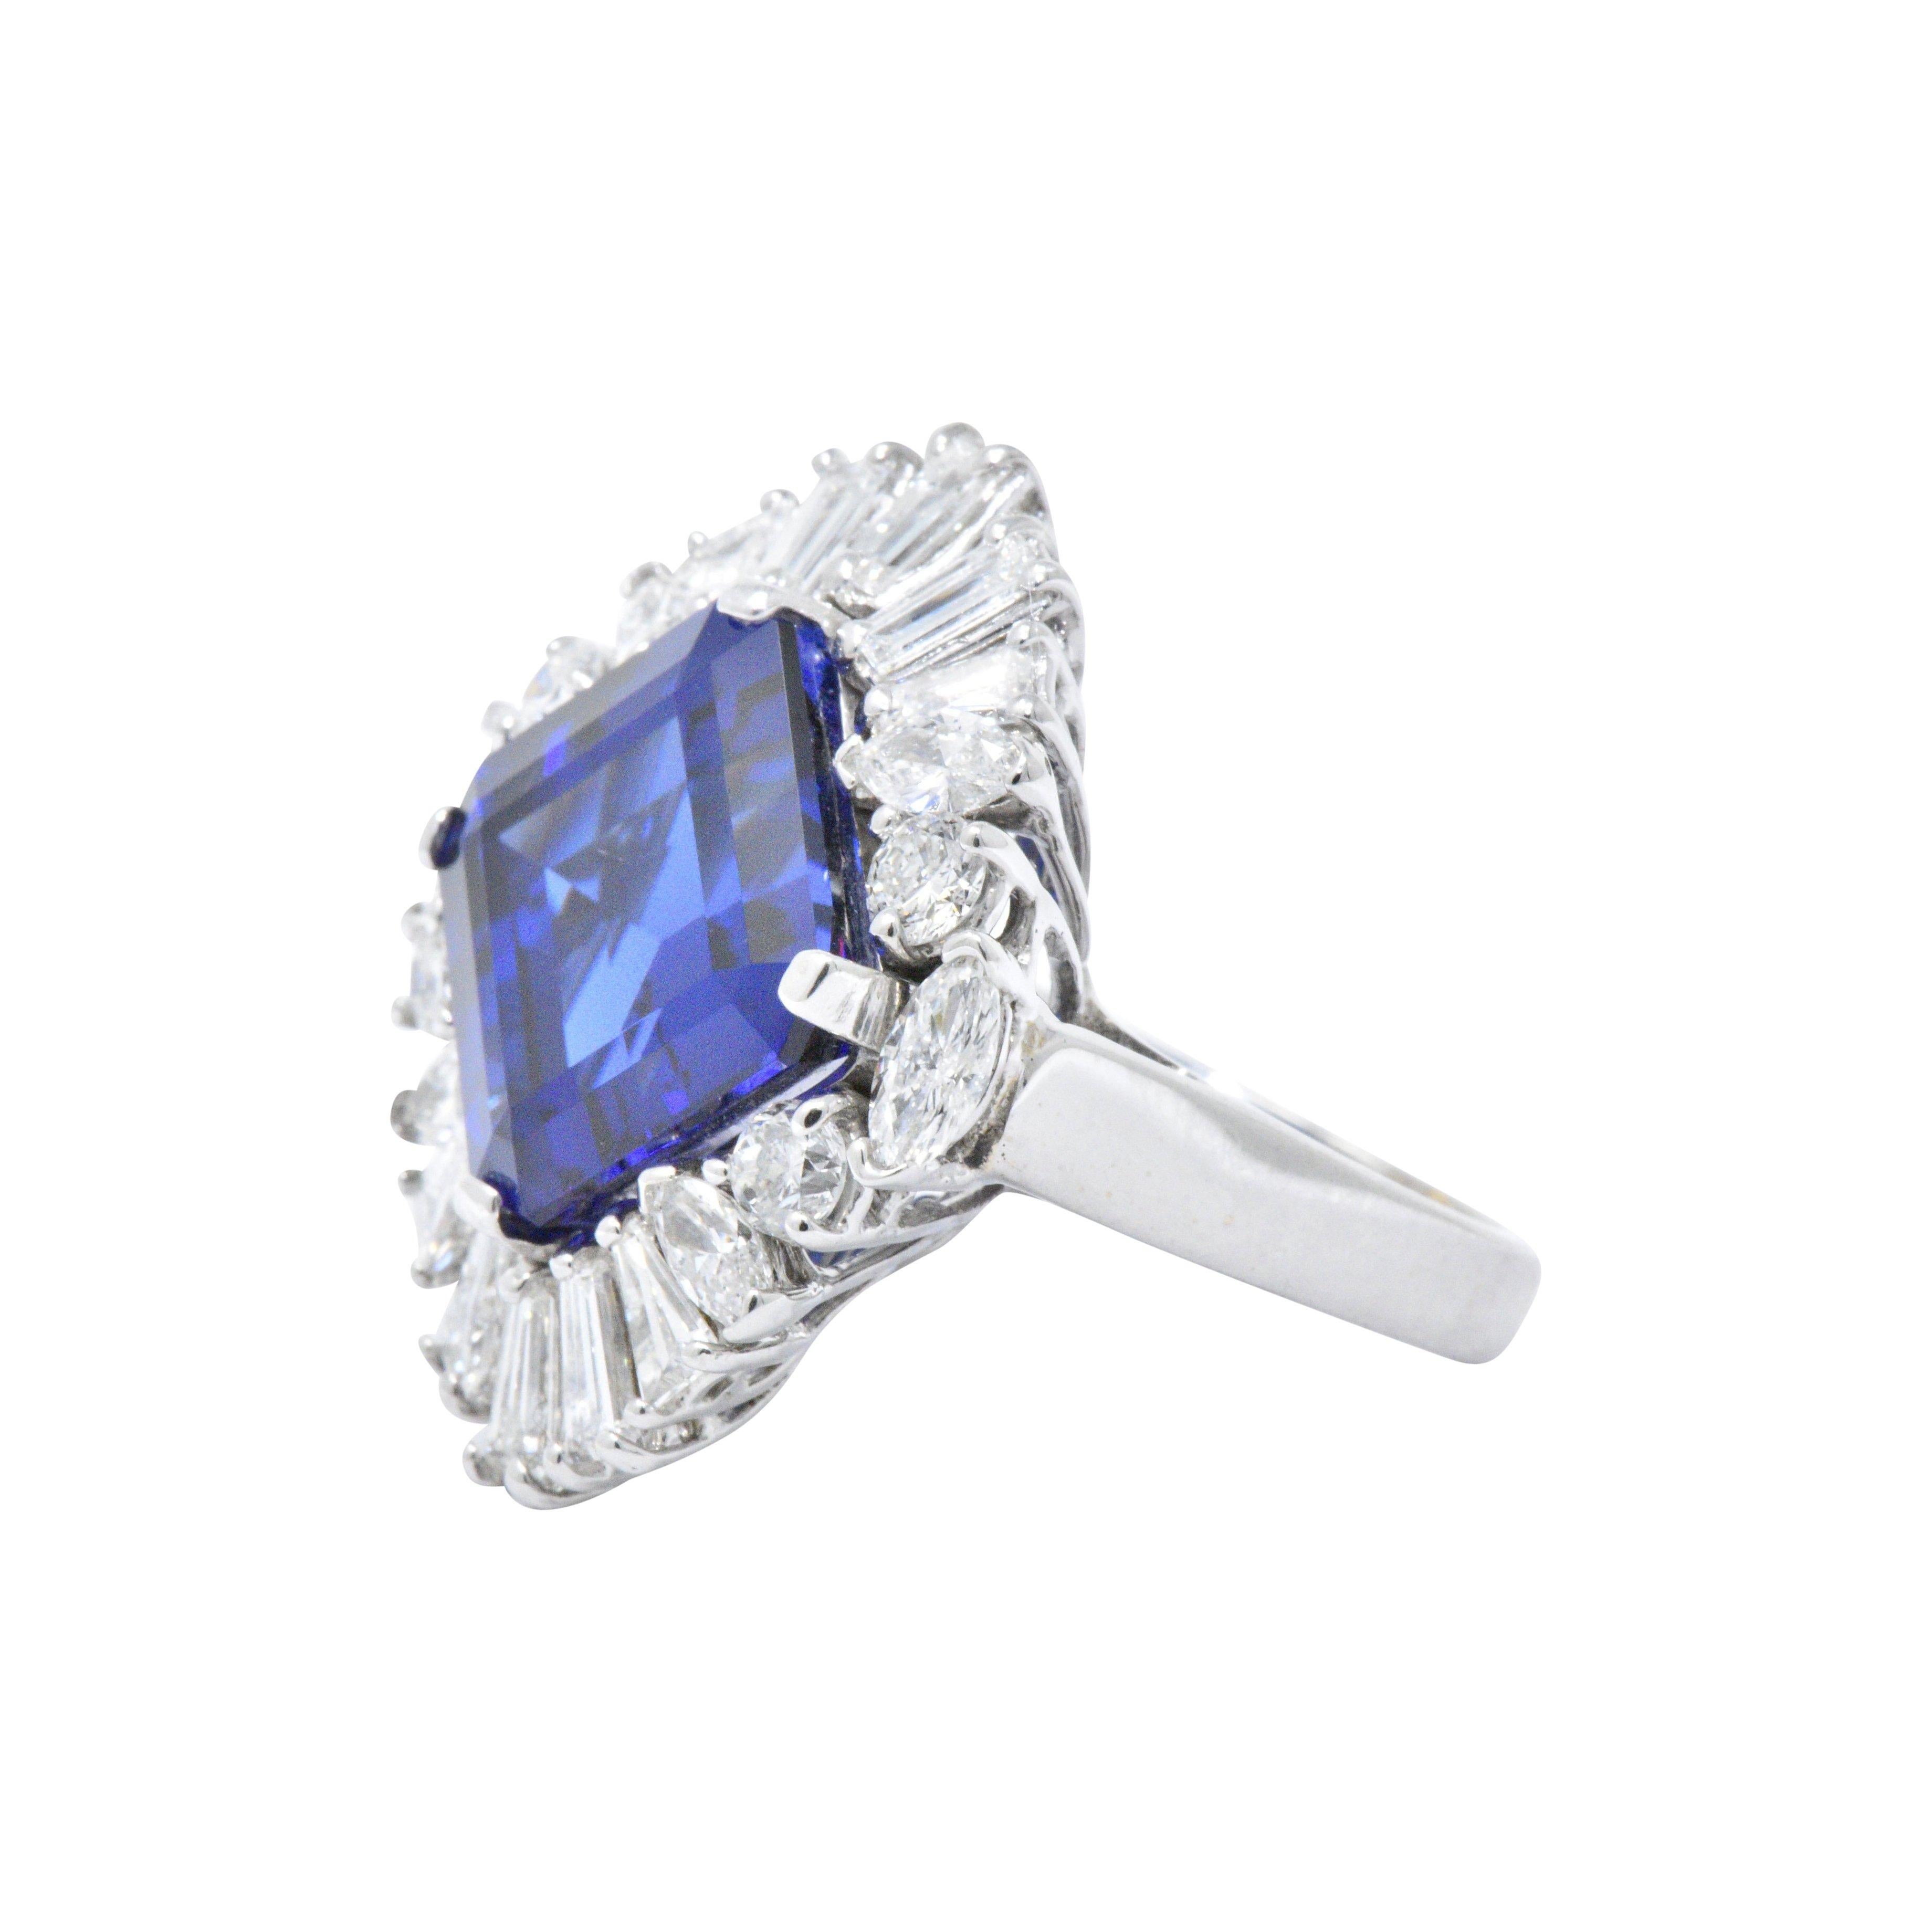 Centering an exceptional 12.00 carat square step cut tanzanite with a rich bright blue color
In a round brilliant, tapered baguette and marquise cut diamond surround, approximately 3.00 carats total, GHI color, VS to SI clarity
This statement ring